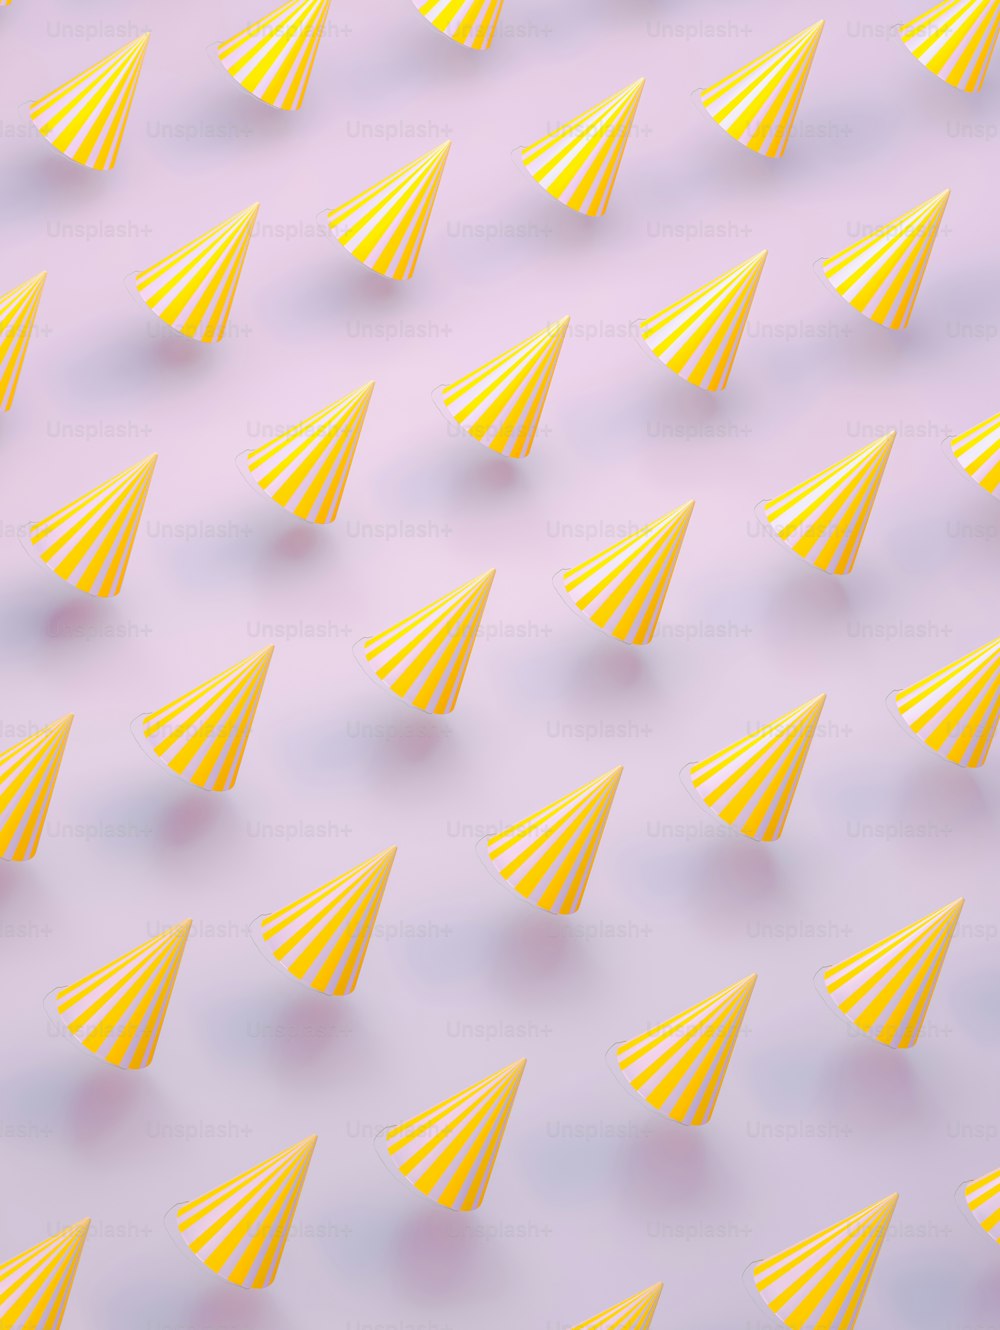 a pattern of yellow paper cones on a purple background